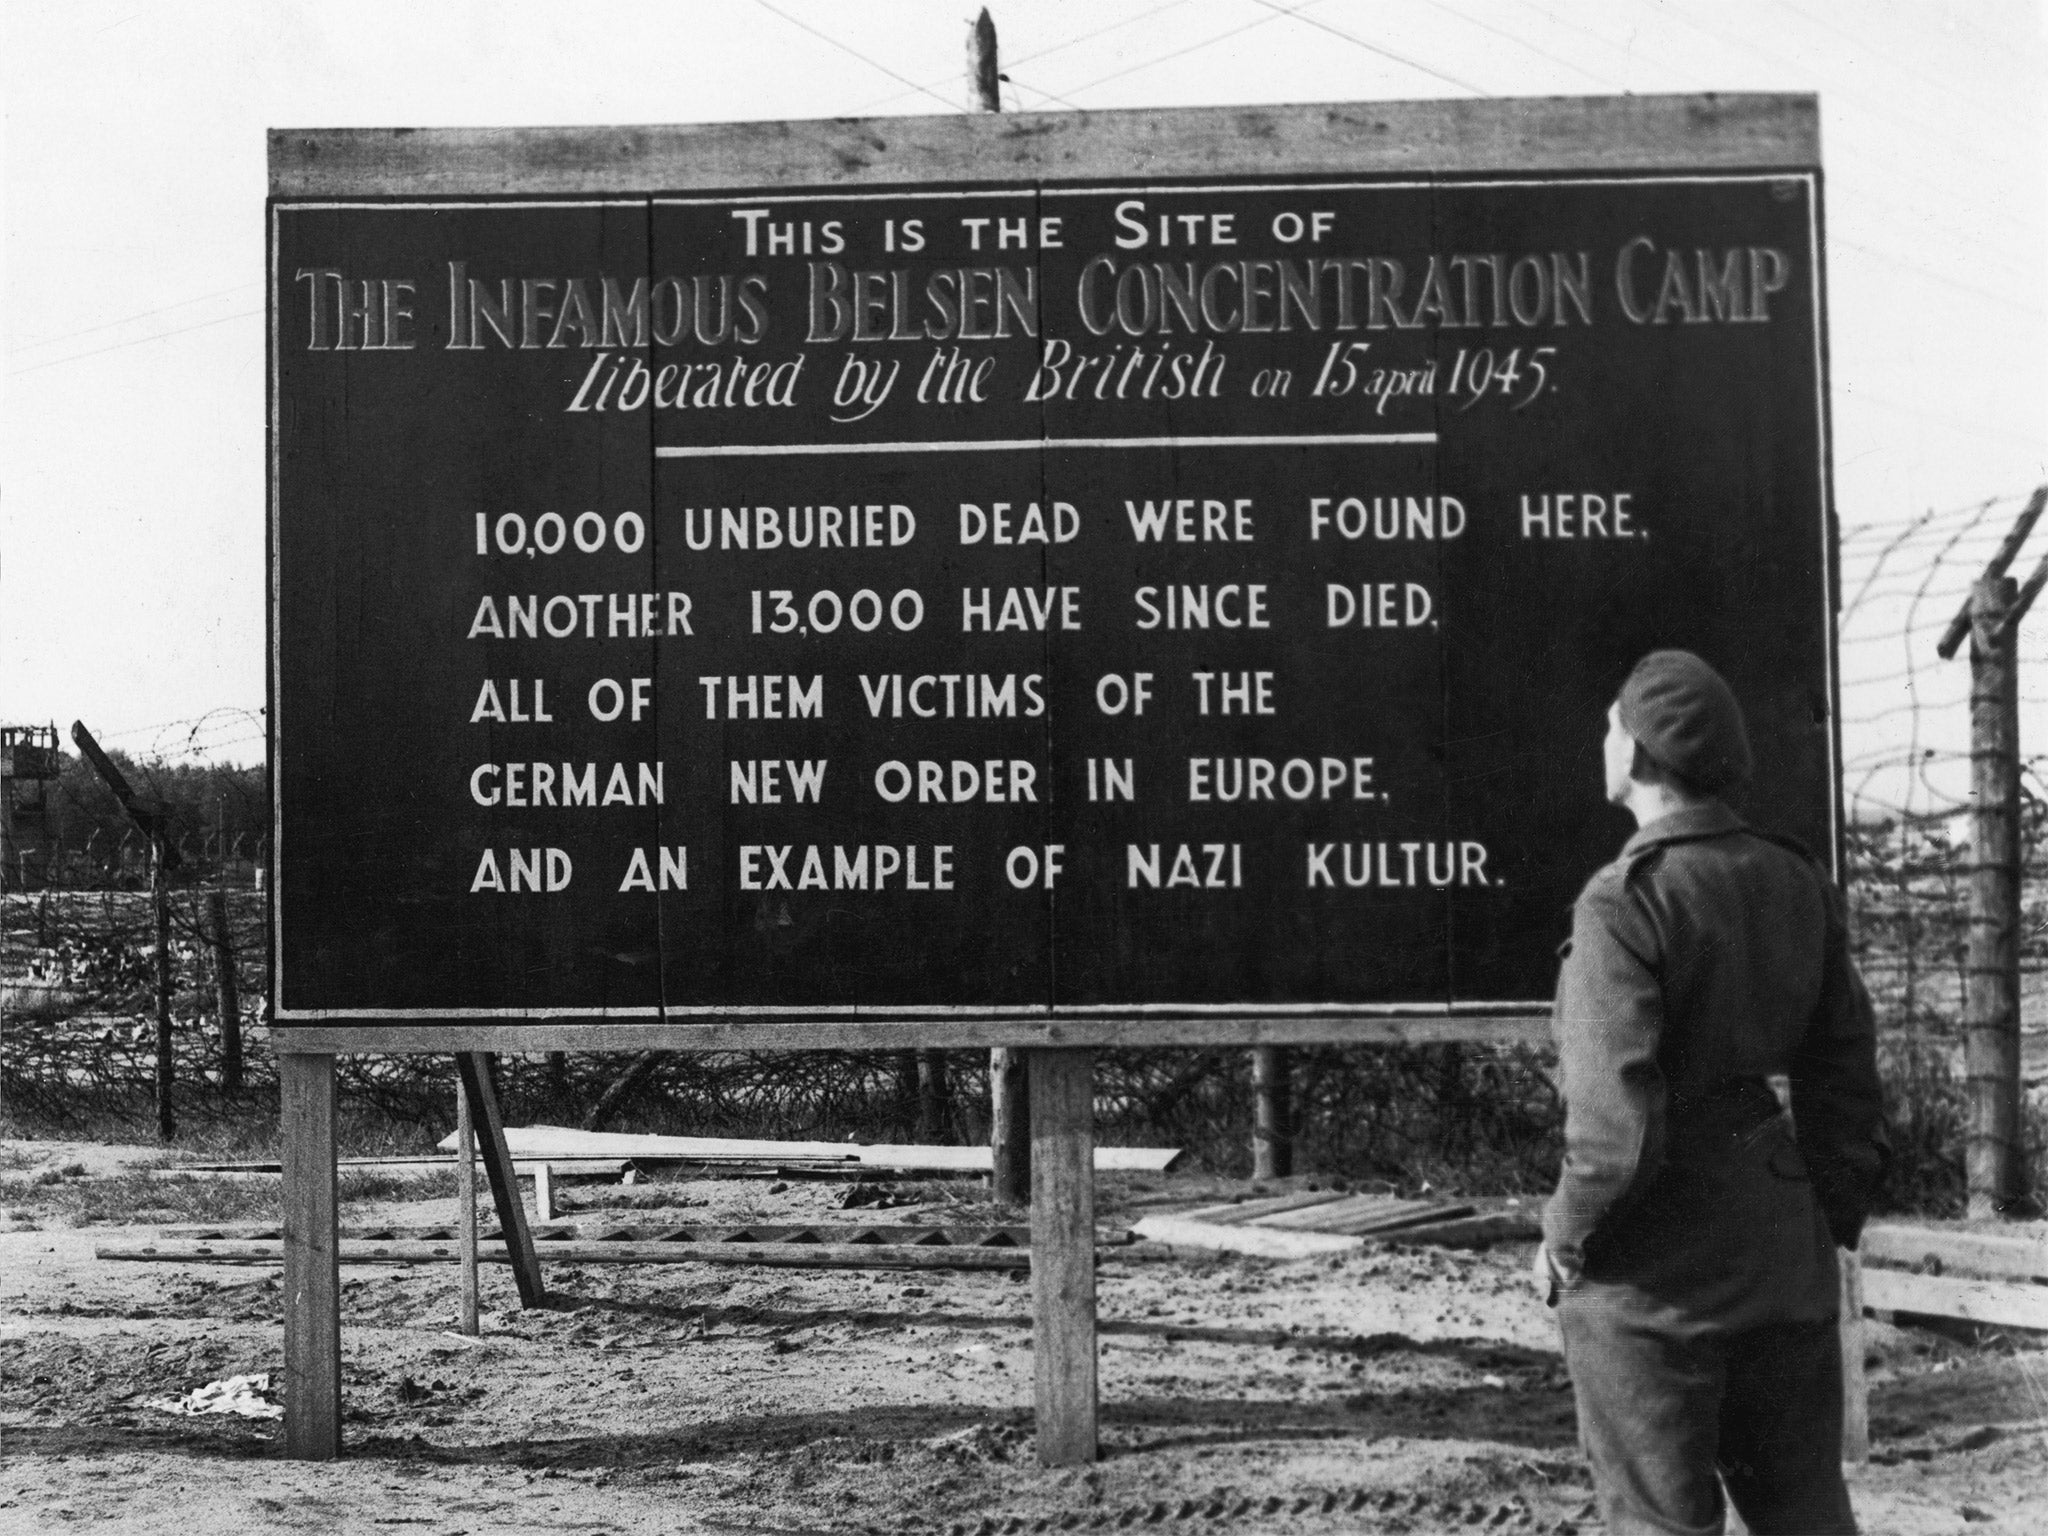 &#13;
A British soldier reads a billboard posted at the entrance of the Belsen concentration camp (Getty)&#13;